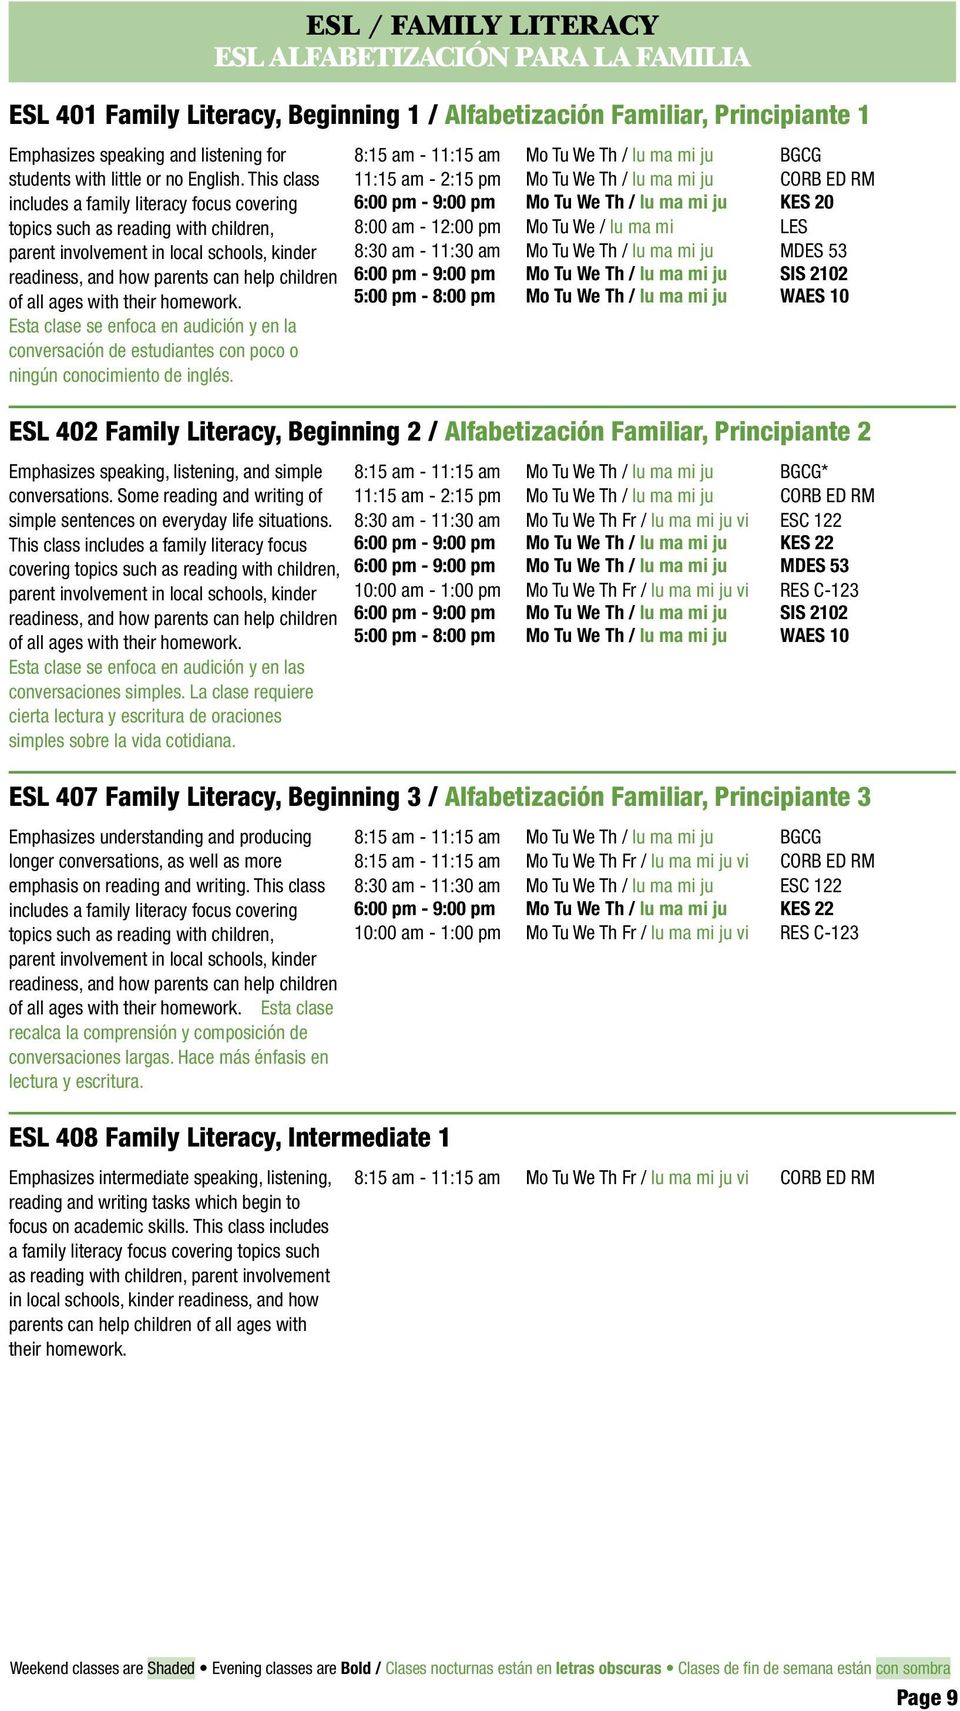 This class includes a family literacy focus covering topics such as reading with children, parent involvement in local schools, kinder readiness, and how parents can help children of all ages with